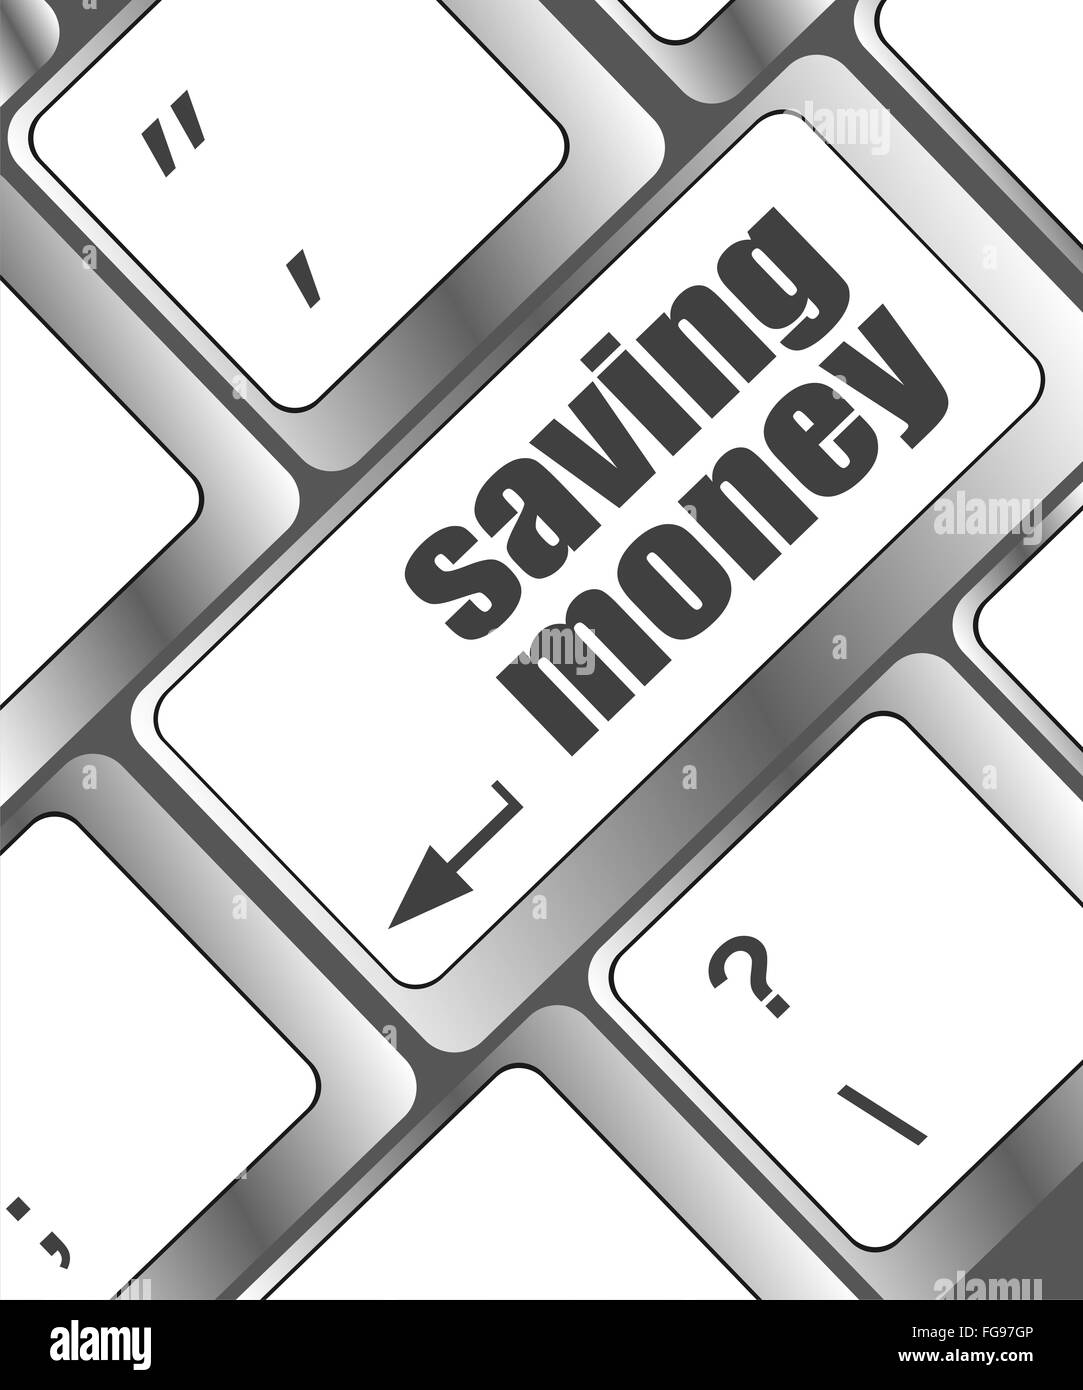 saving money for investment with a button on computer keyboard Stock Photo